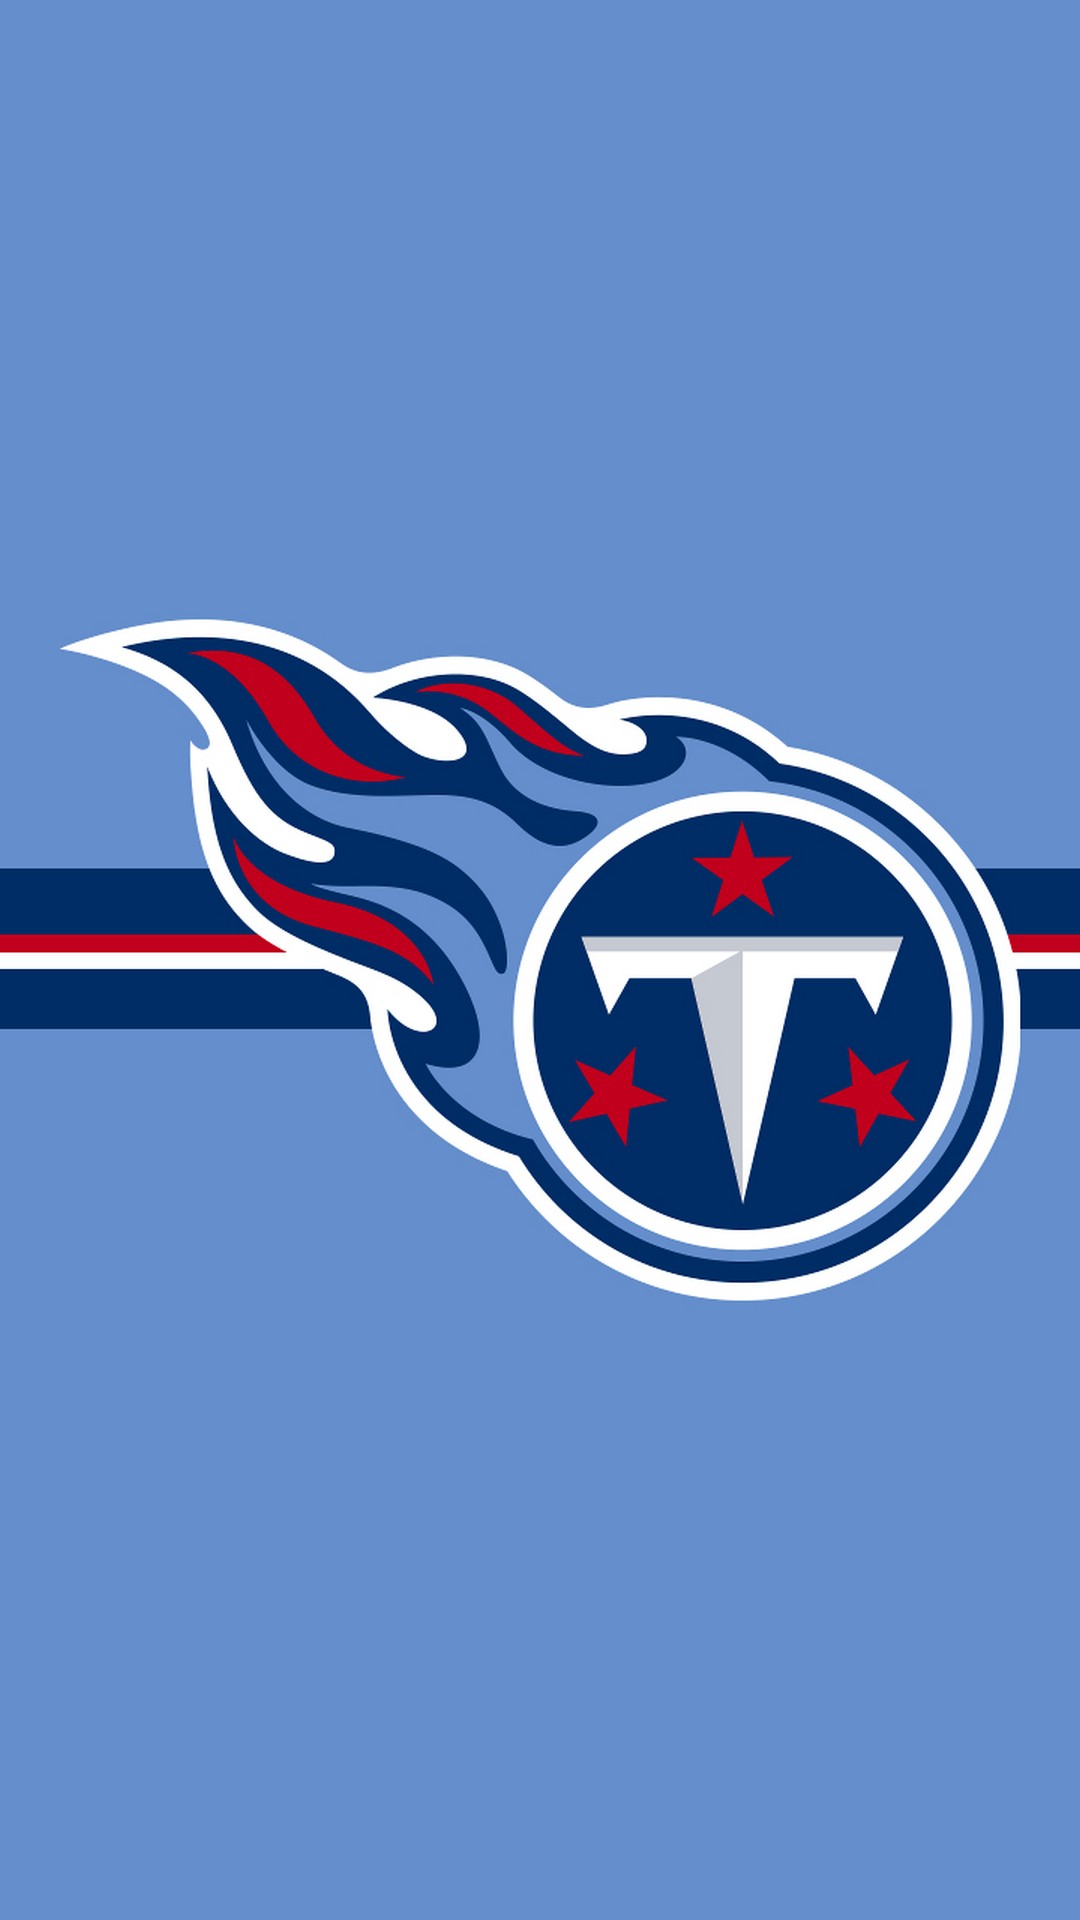 Tennessee Titans iPhone 7 Plus Wallpaper With high-resolution 1080X1920 pixel. You can use this wallpaper for your Mac or Windows Desktop Background, iPhone, Android or Tablet and another Smartphone device